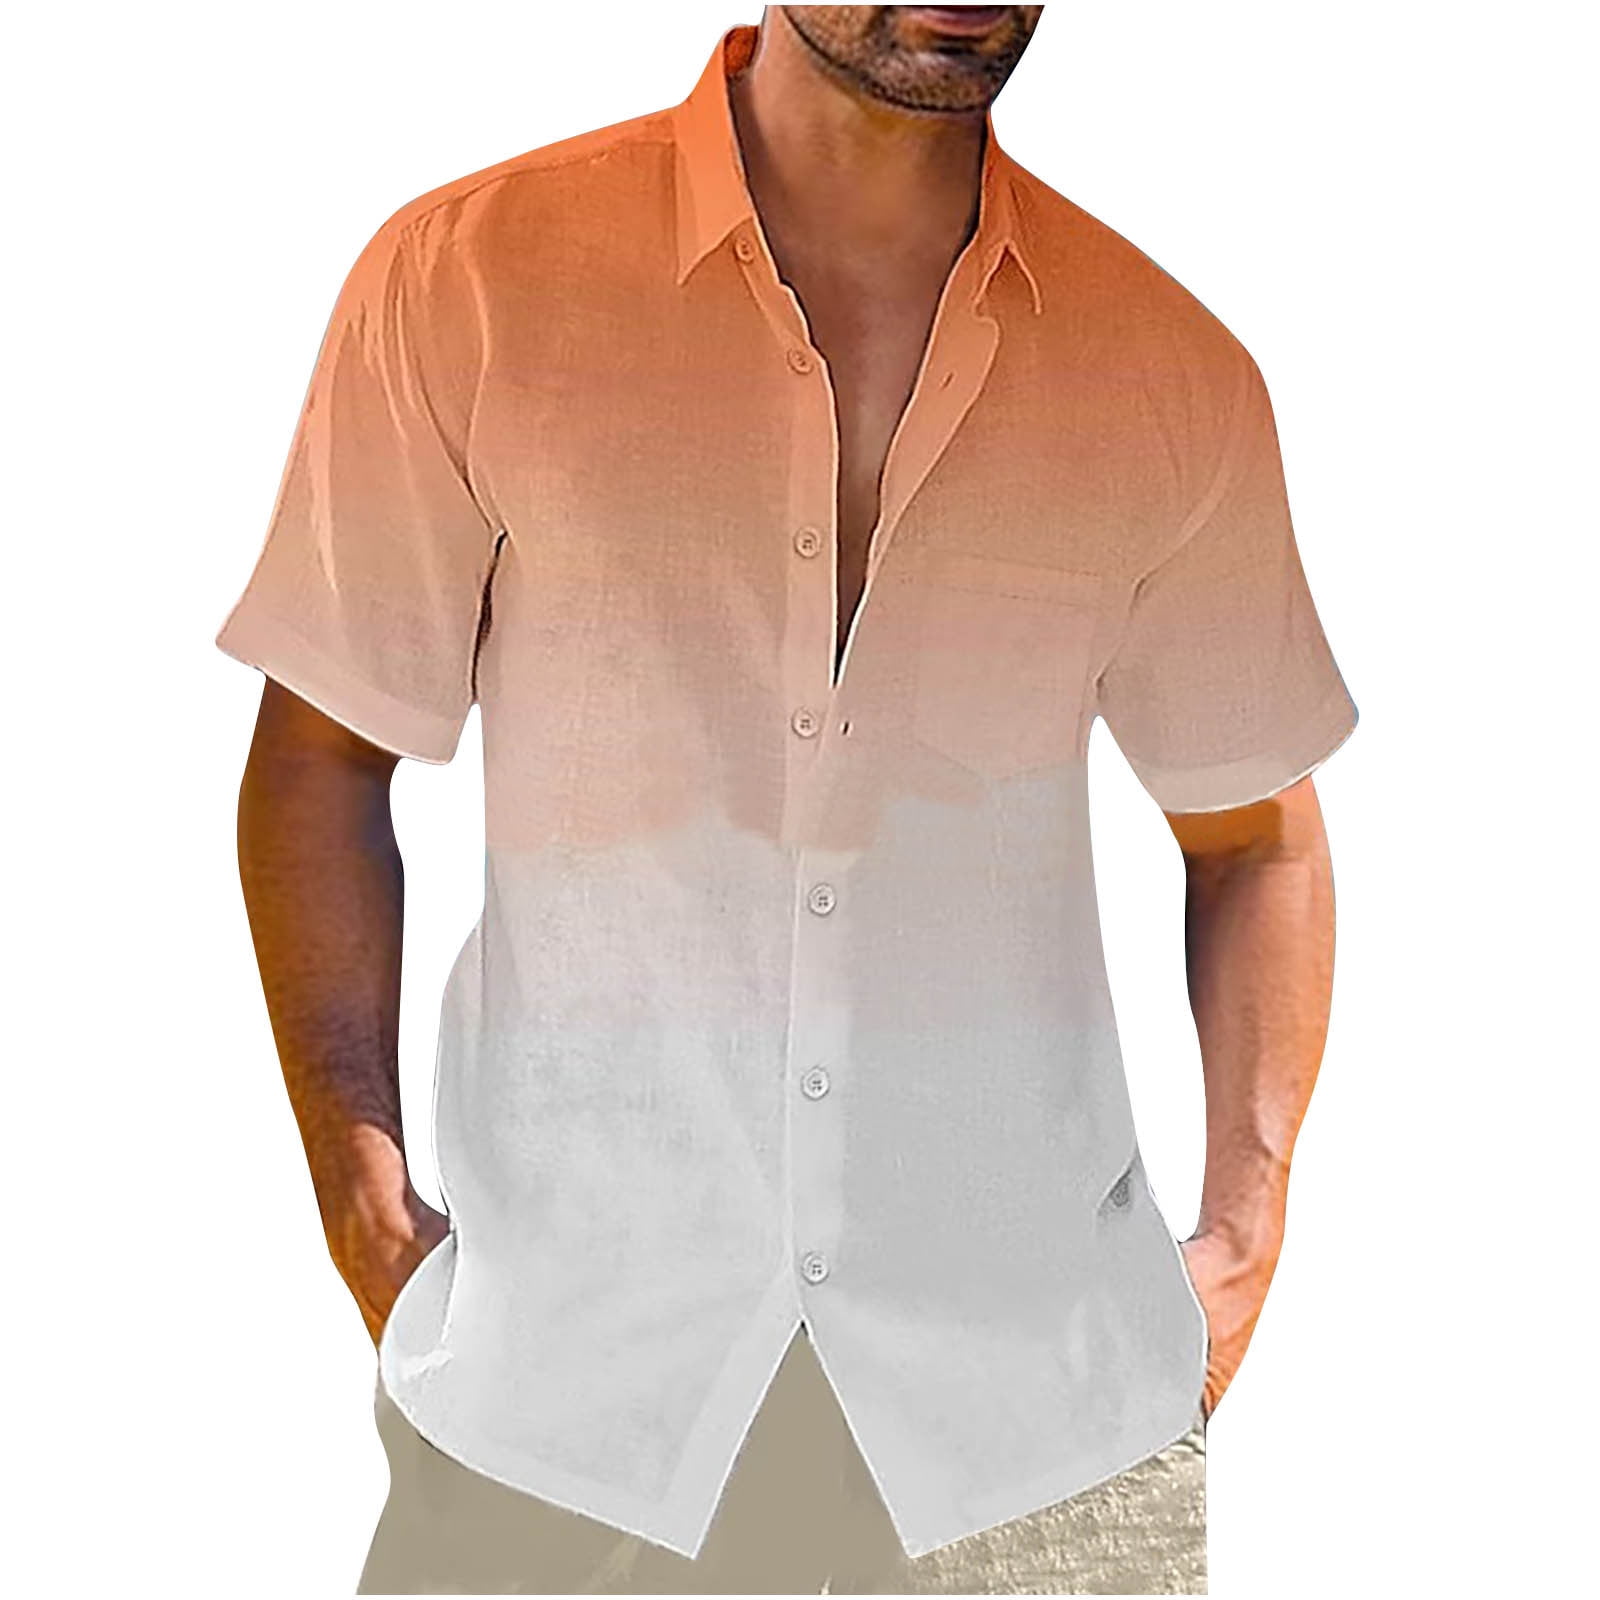 ZCFZJW Men's Gradient Color Shirts Trendy Short Sleeve Button Down Ombre  Tops Loose Regular FIt Casual Holiday Beach Hawaiian T-Shirts with Pocket